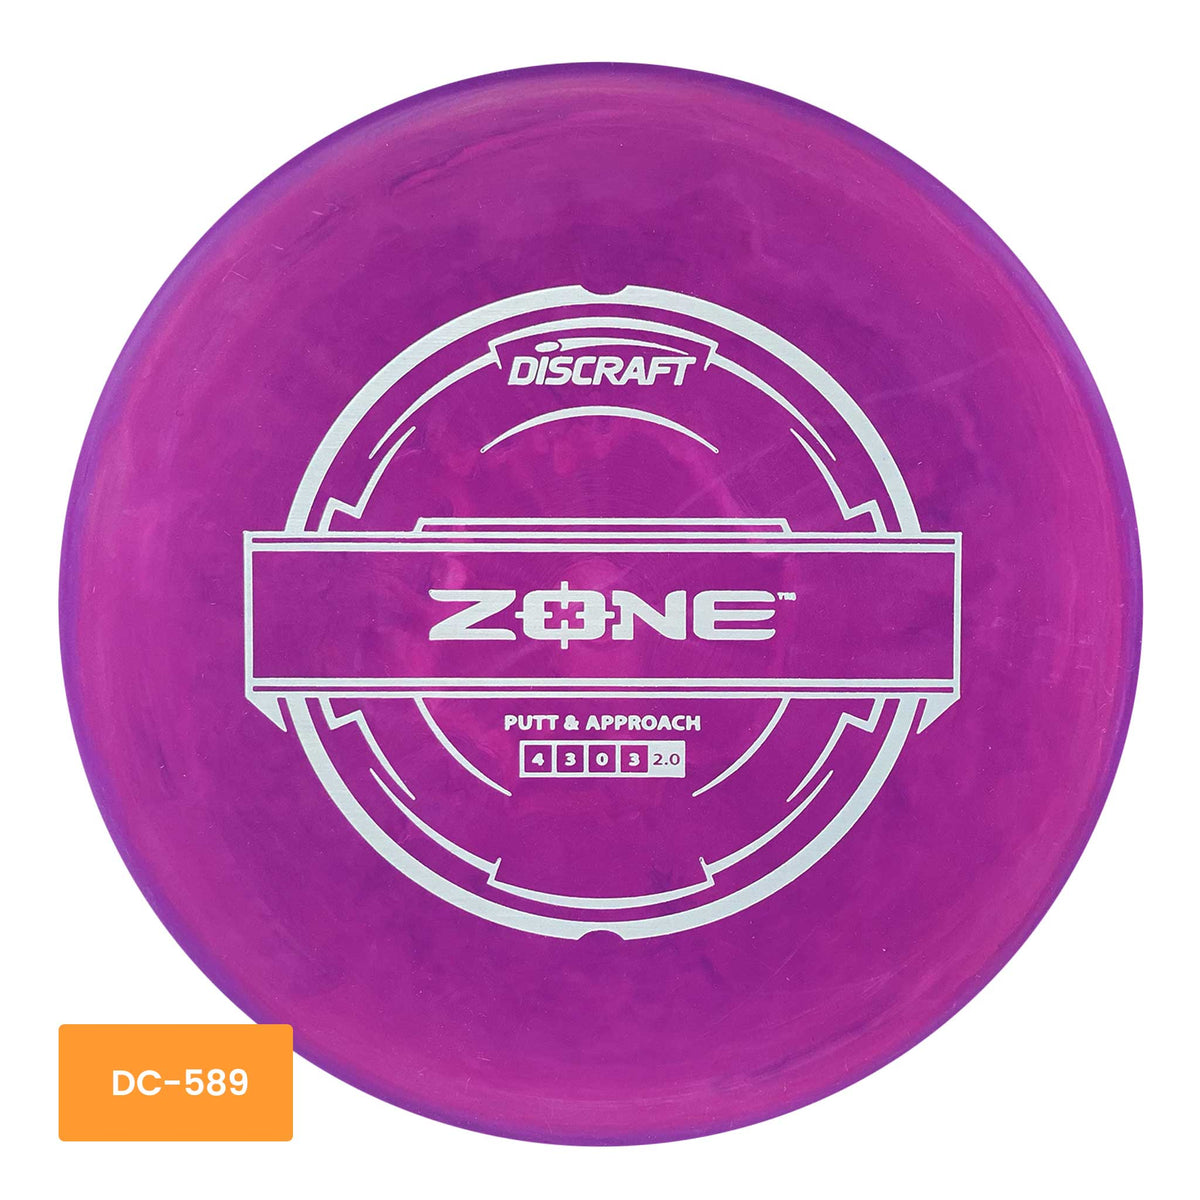 Discraft Putter Line Zone putter and approach - Purple